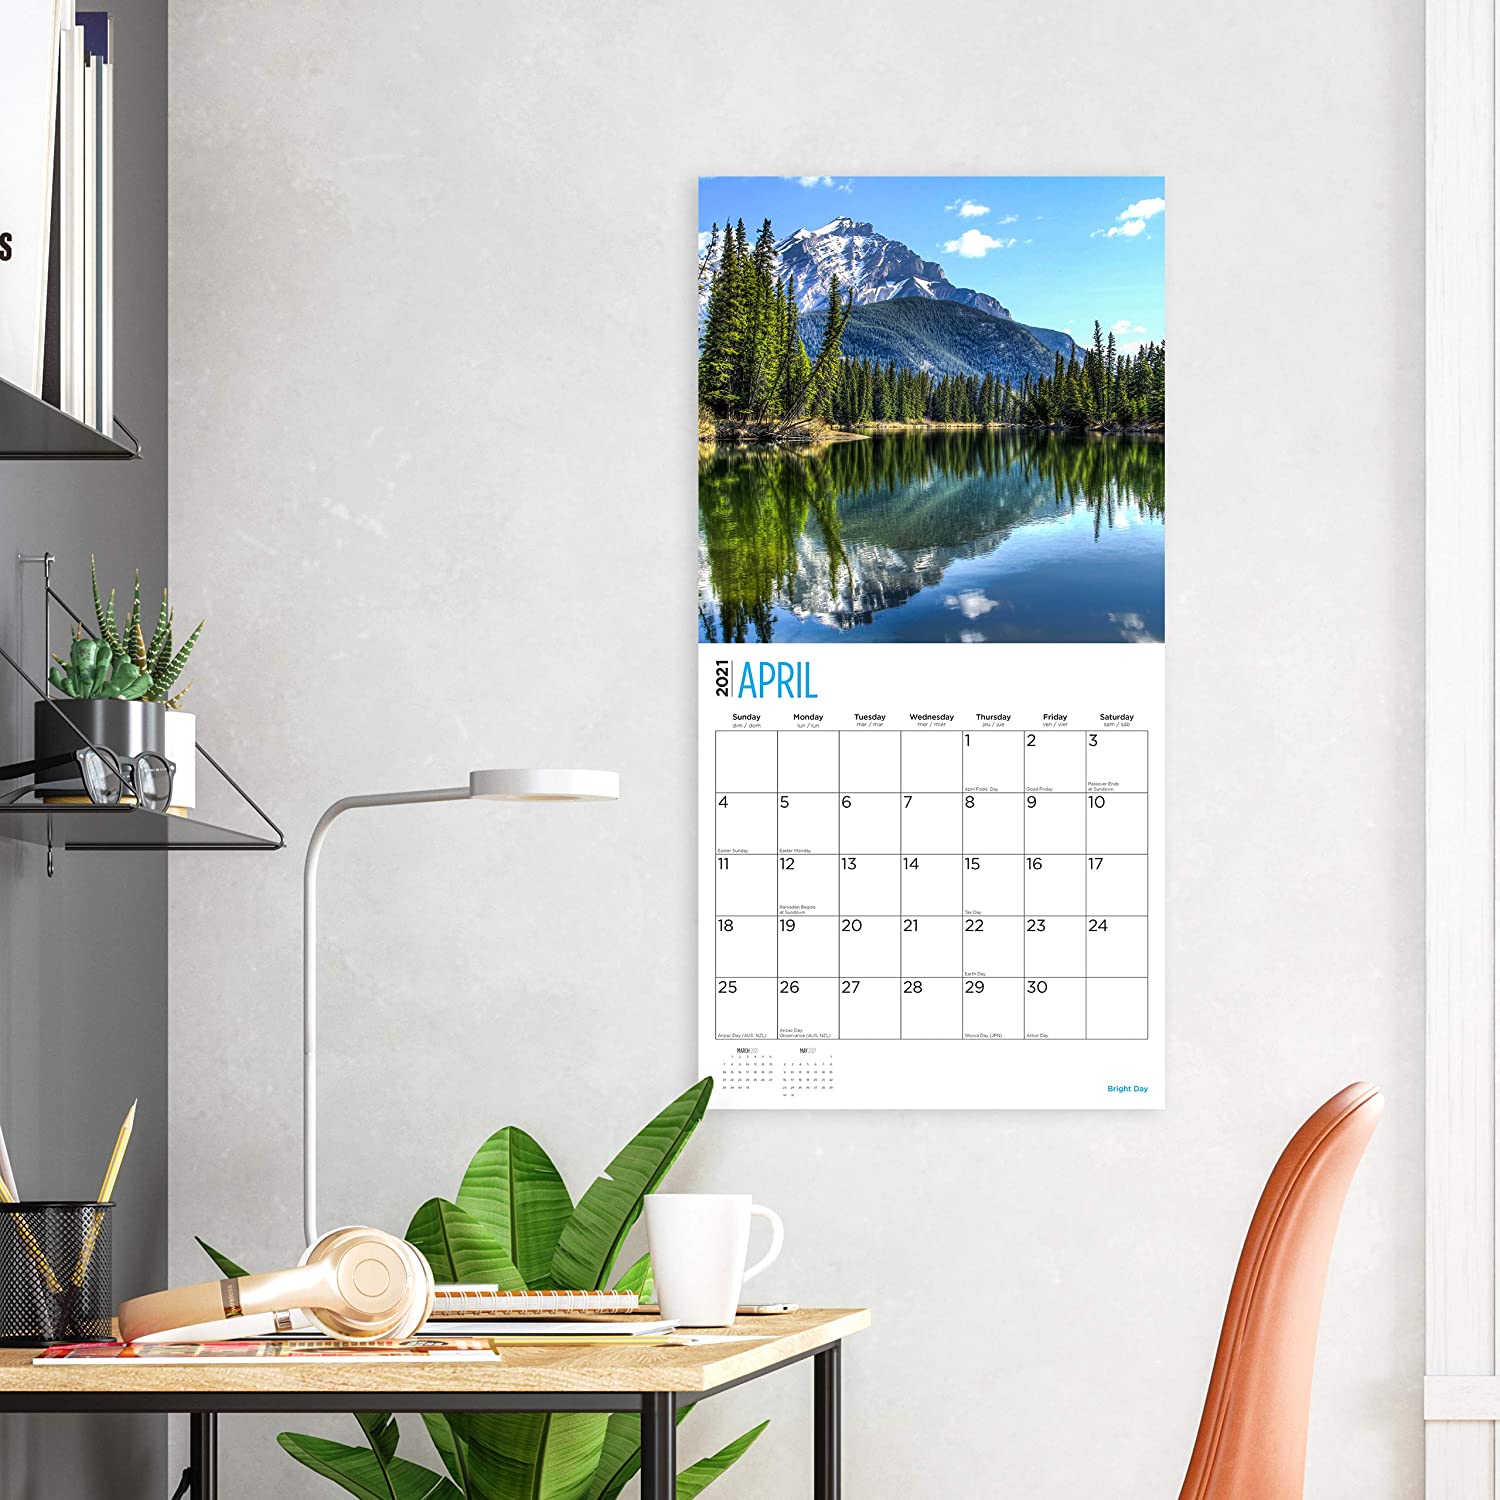 2021 Rocky Mountains Wall Calendar by Bright Day, 12 x 12 Inch ...